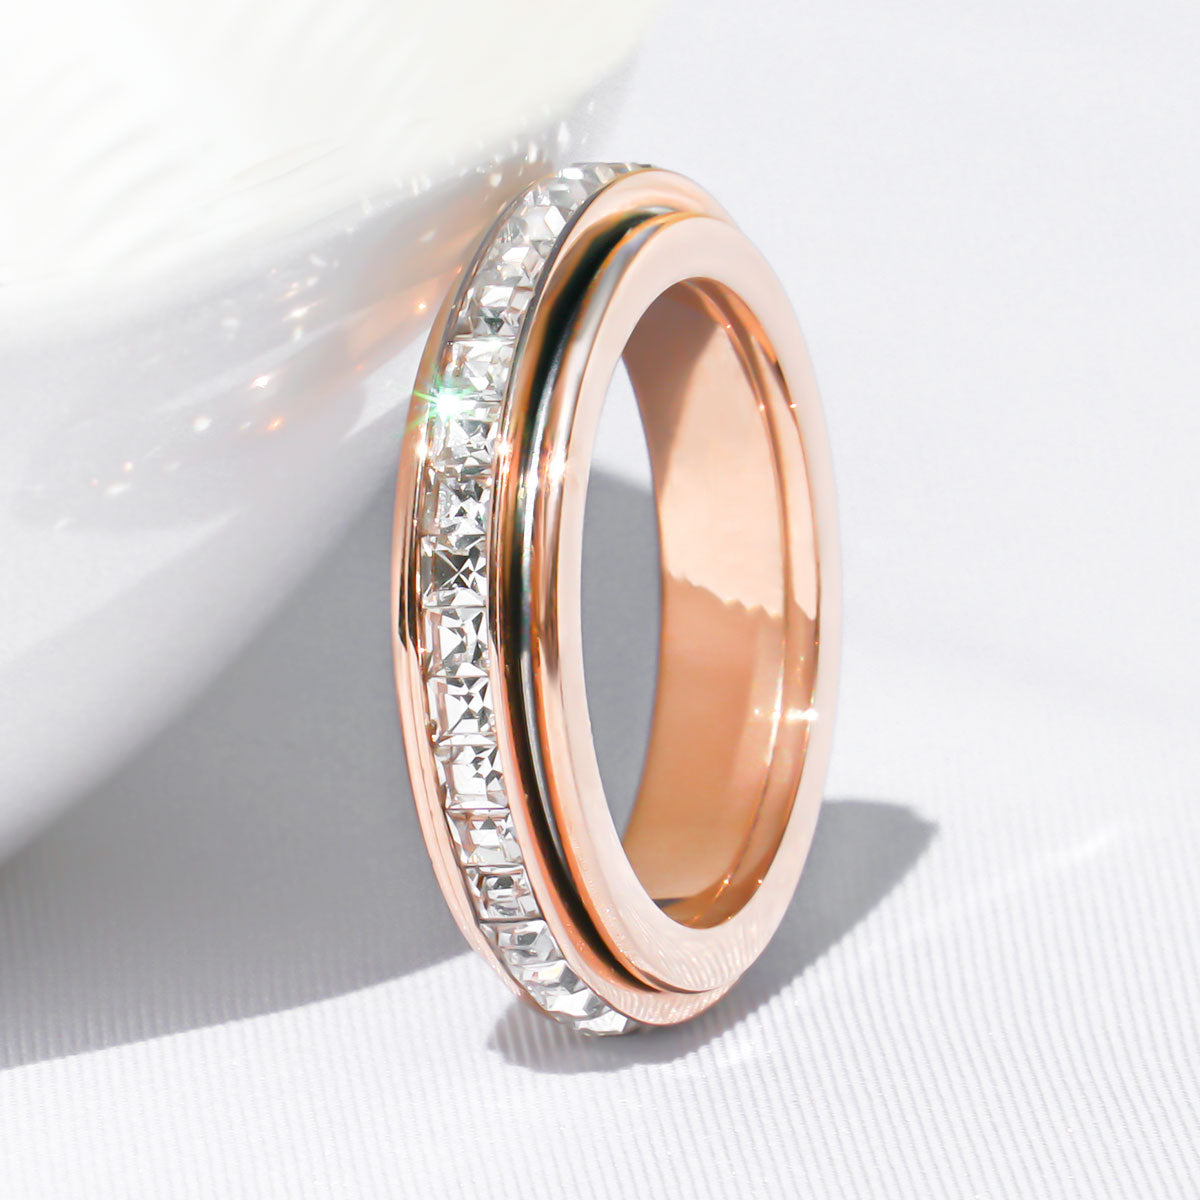 Rose gold crystal fidget ring leaning against the edge of a white bowl on a white background